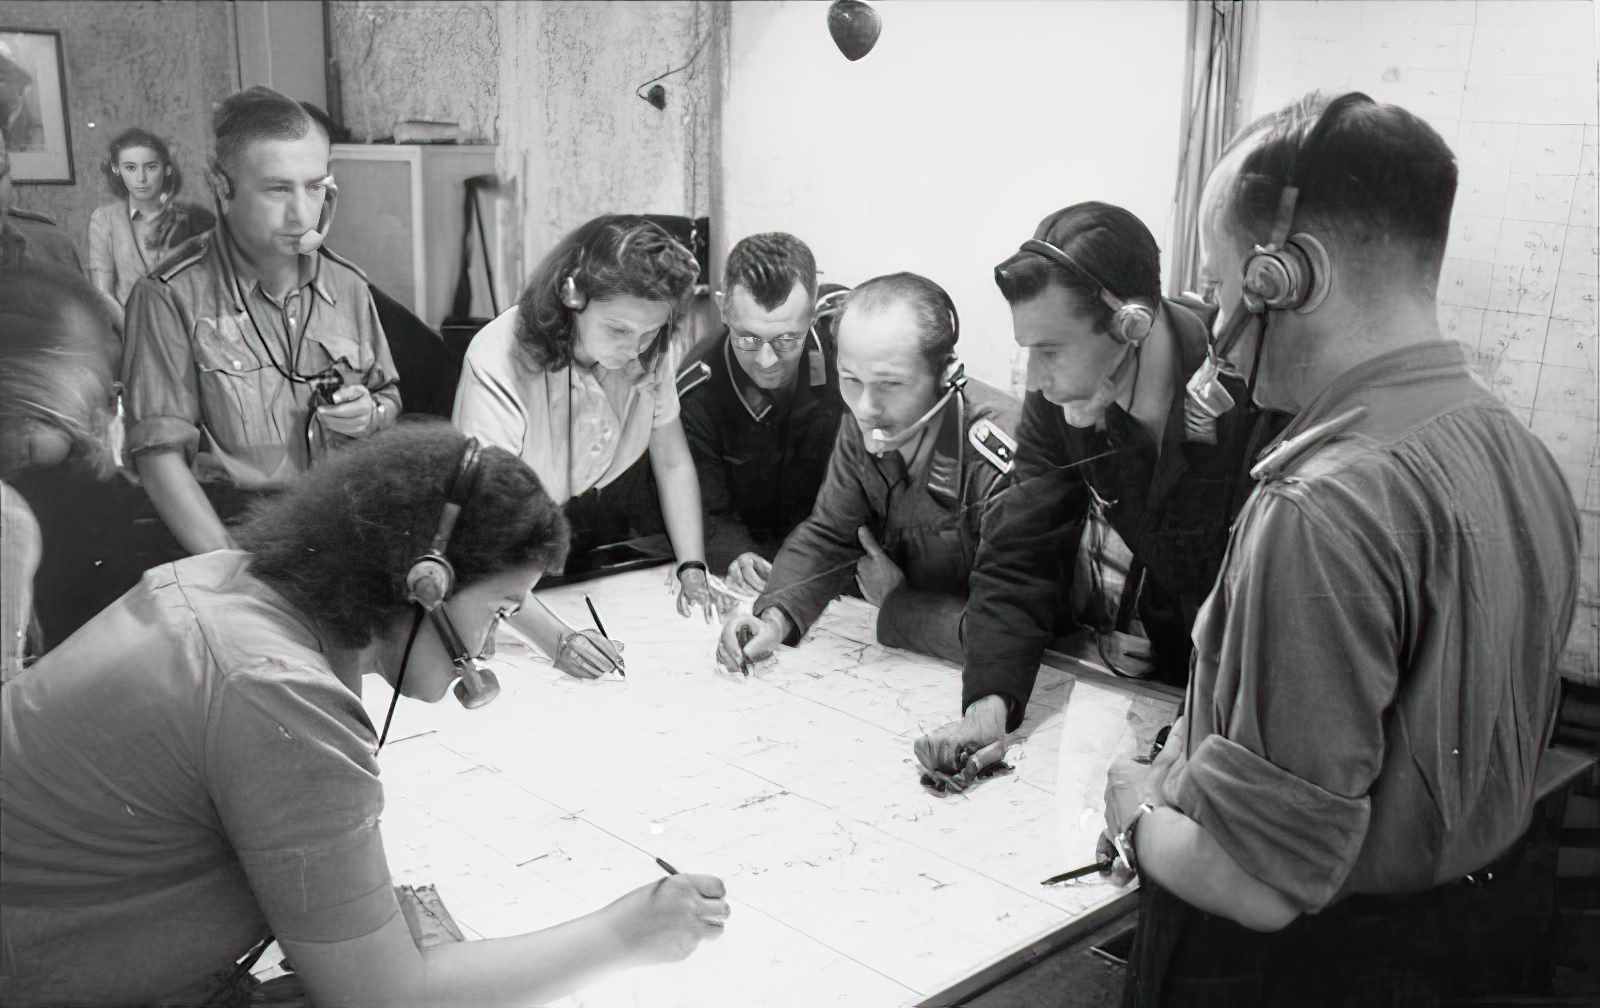 Radio control center for night fighters, Jägerleitoffiziere and assistants plotting courses and directing the airborne fighters